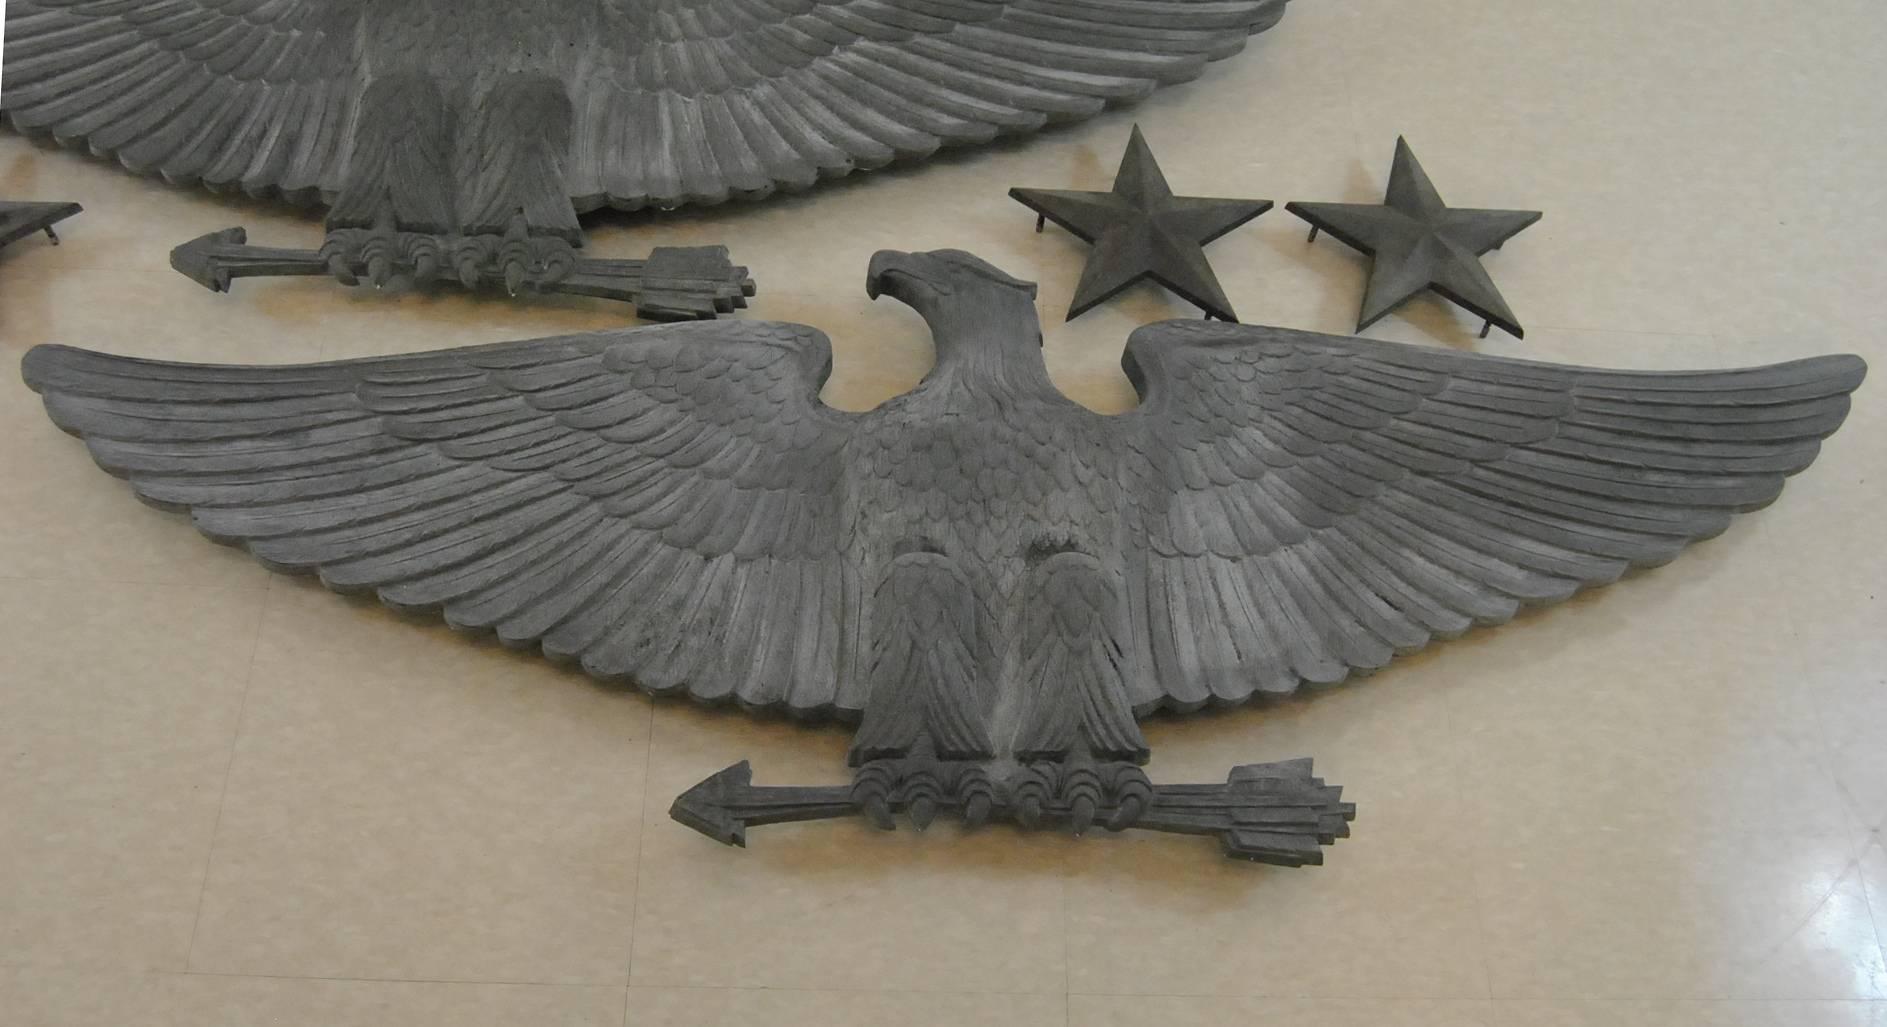 A unique pair of bronze building eagles with two pairs of stars. The bronze eagles and stars have a wonderful Verdigris patina and great detailing. The wing span on the eagles is 5 foot wide and each is 21